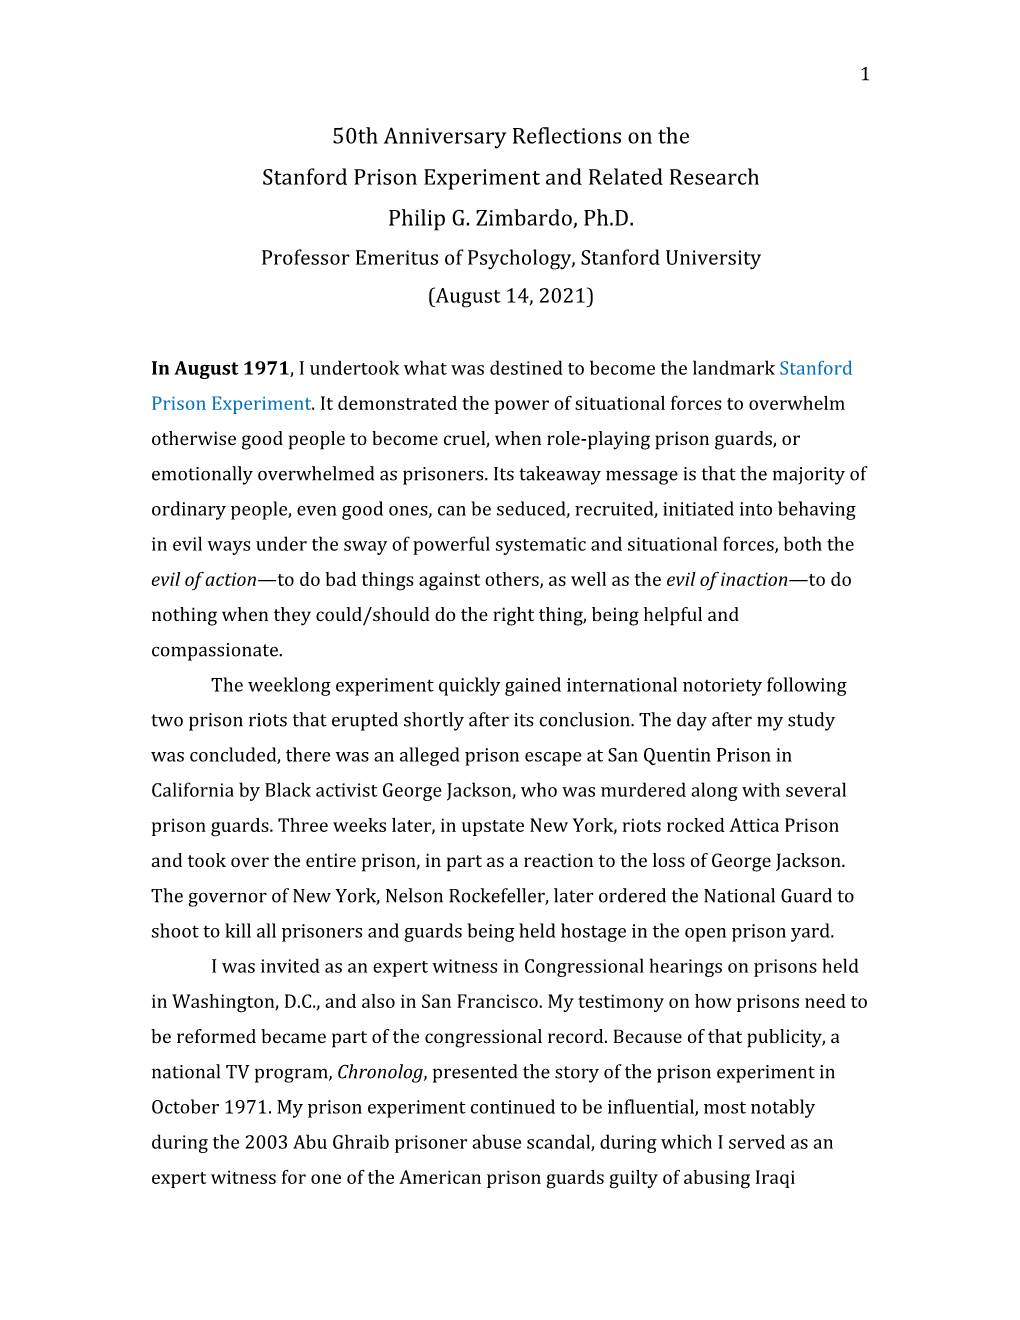 50Th Anniversary Reflections on the Stanford Prison Experiment and Related Research Philip G